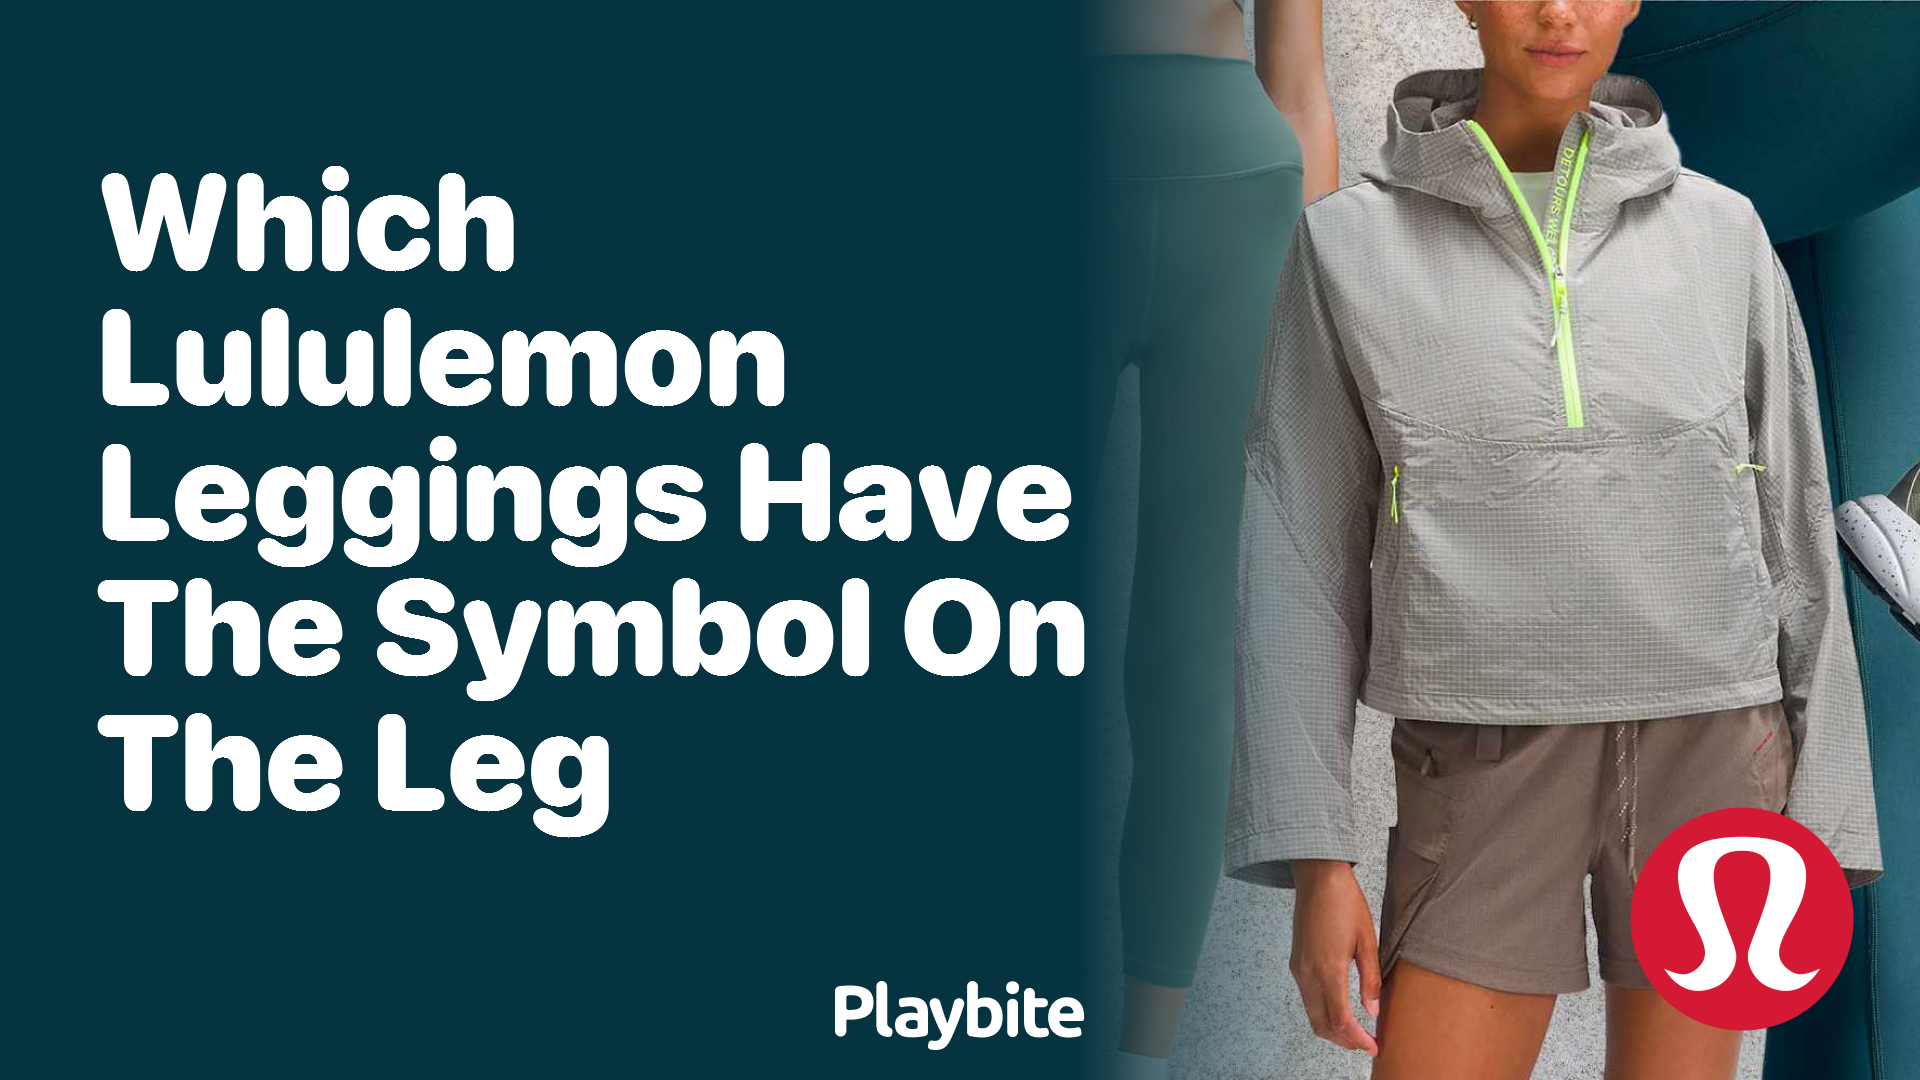 Which Lululemon Leggings Have the Symbol on the Leg? - Playbite